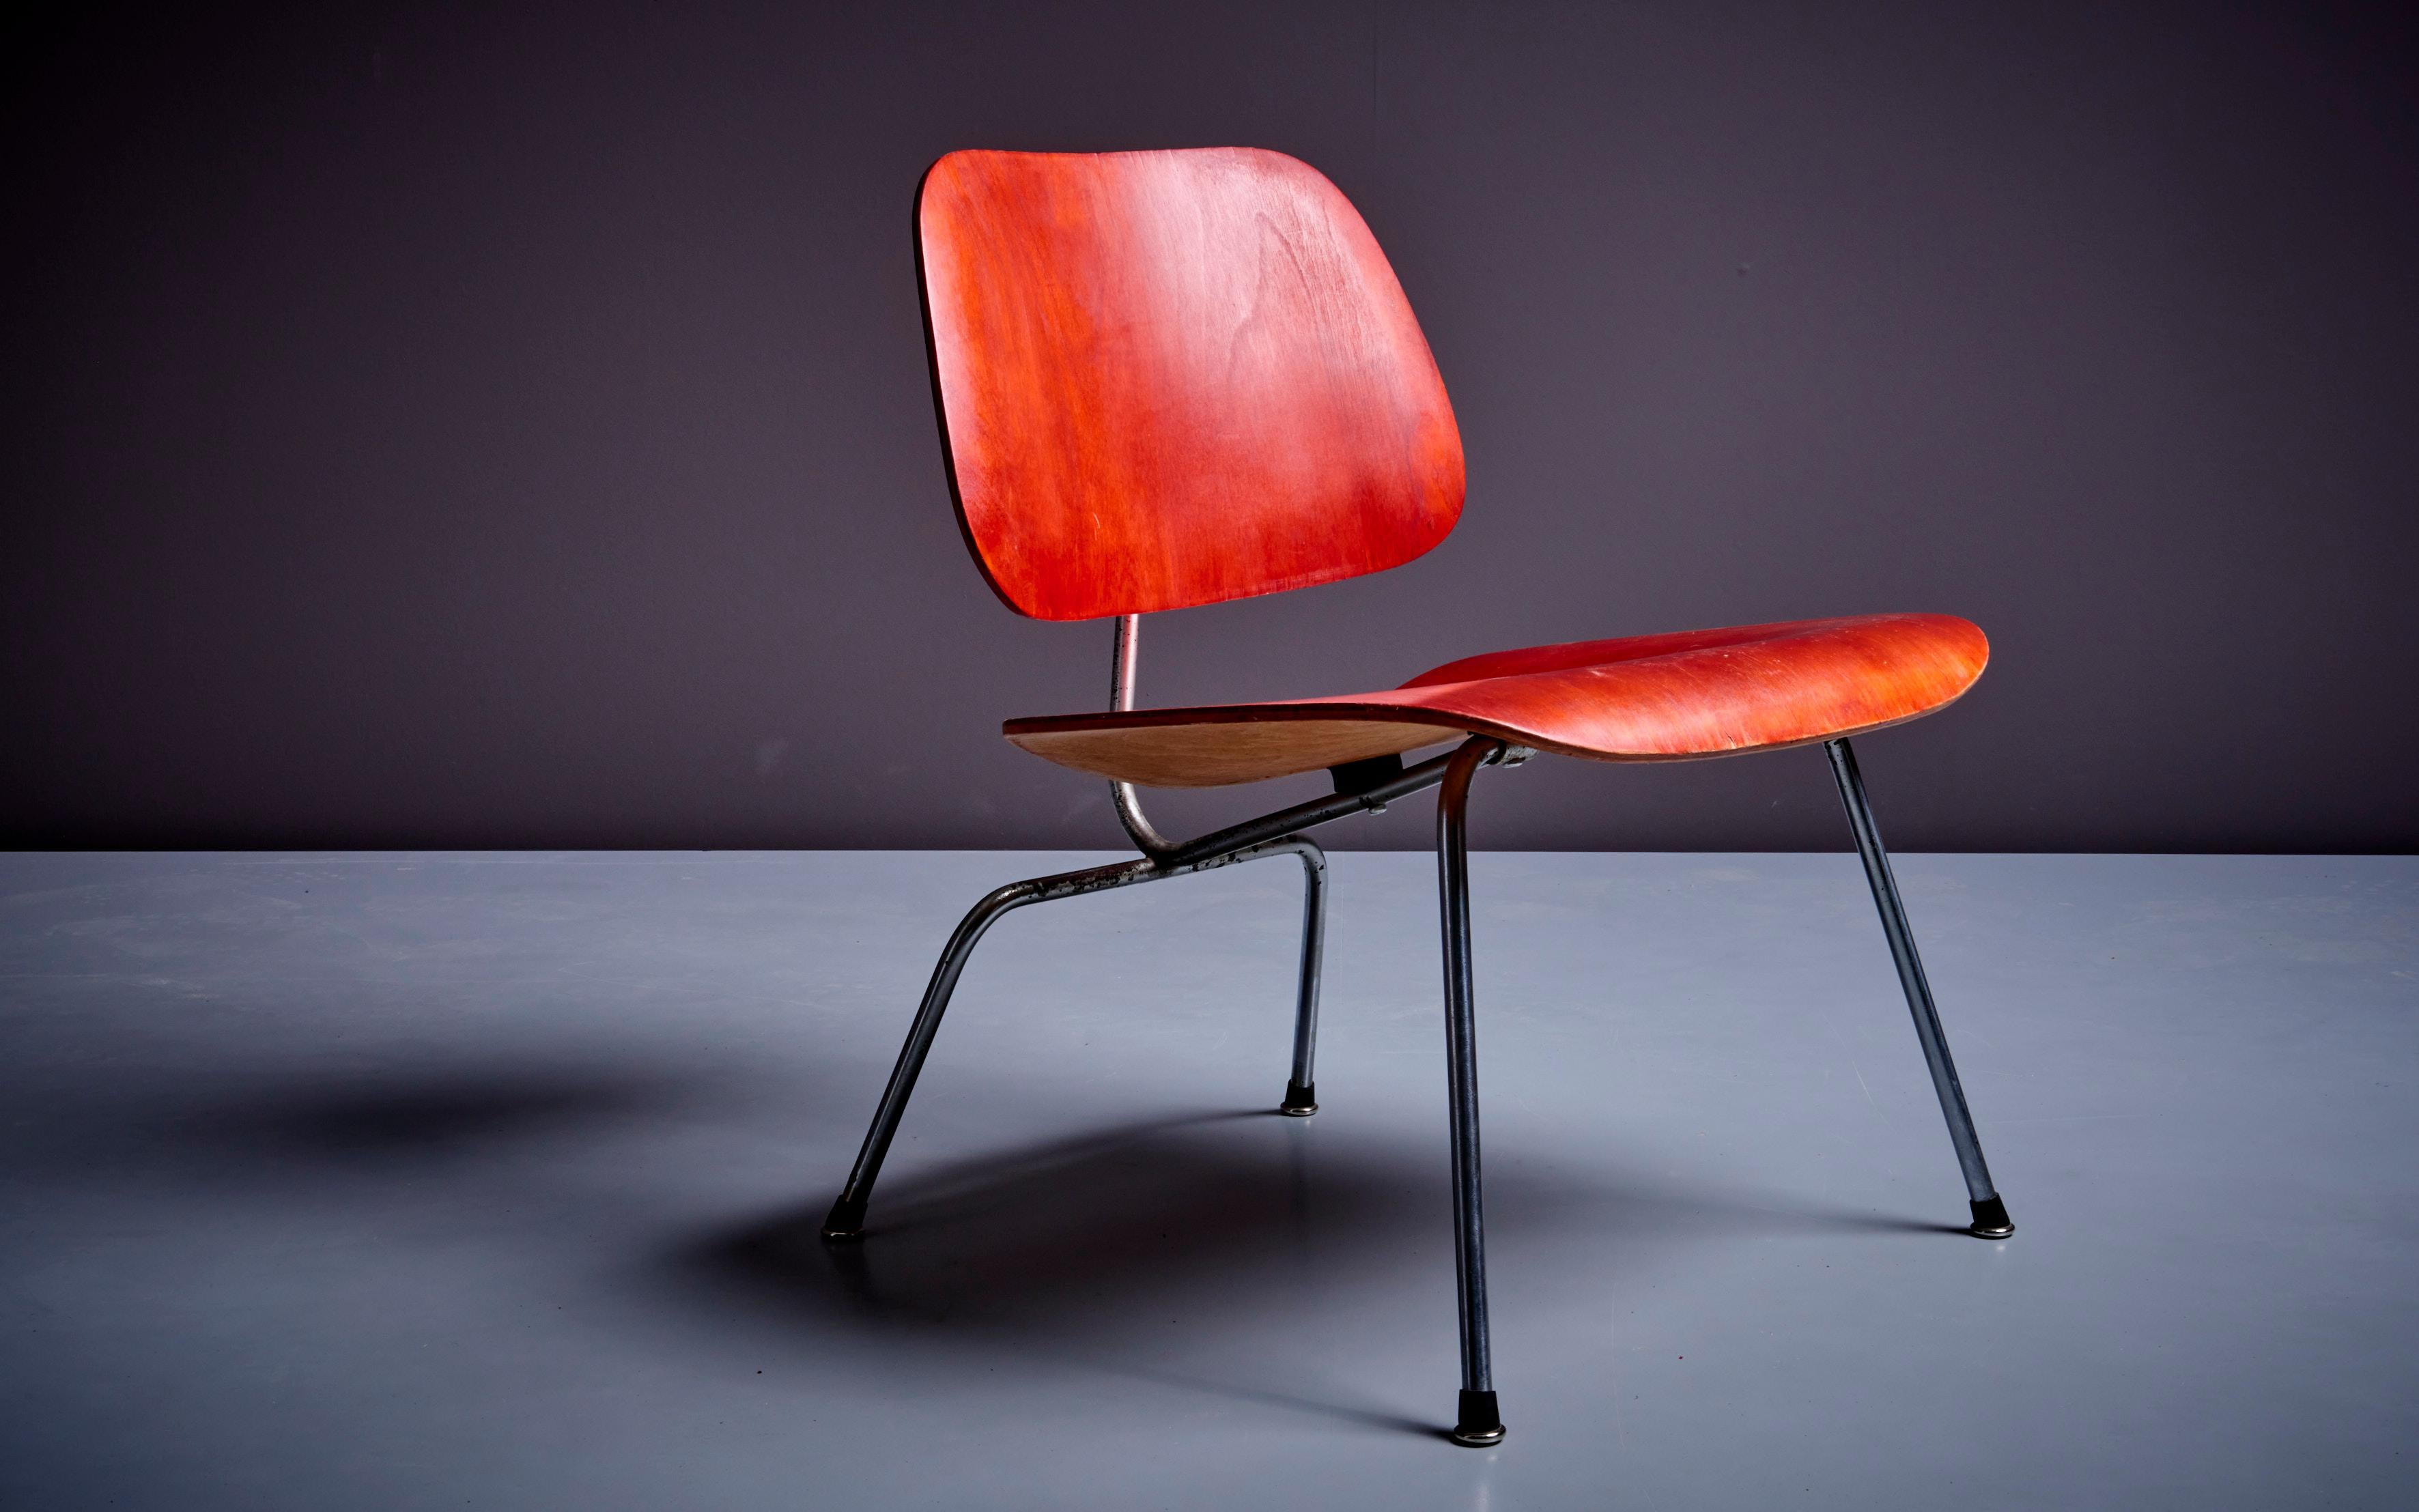 Mid-Century Modern Early LCM Chair in Rare Aniline Red by Charles Eames for Herman Miller